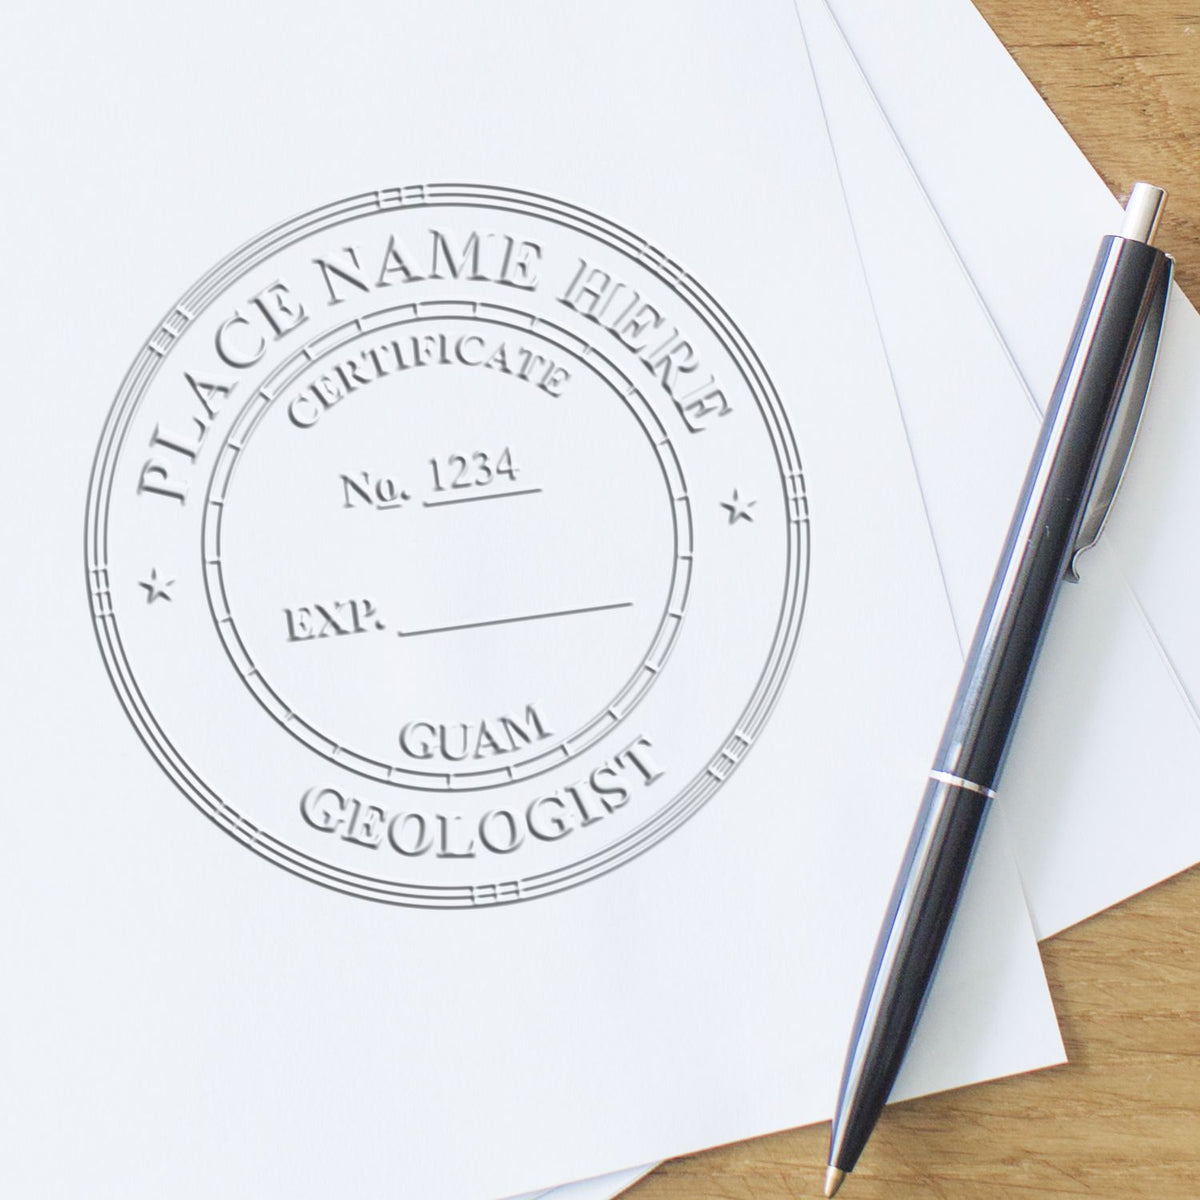 A photograph of the Soft Guam Professional Geologist Seal stamp impression reveals a vivid, professional image of the on paper.